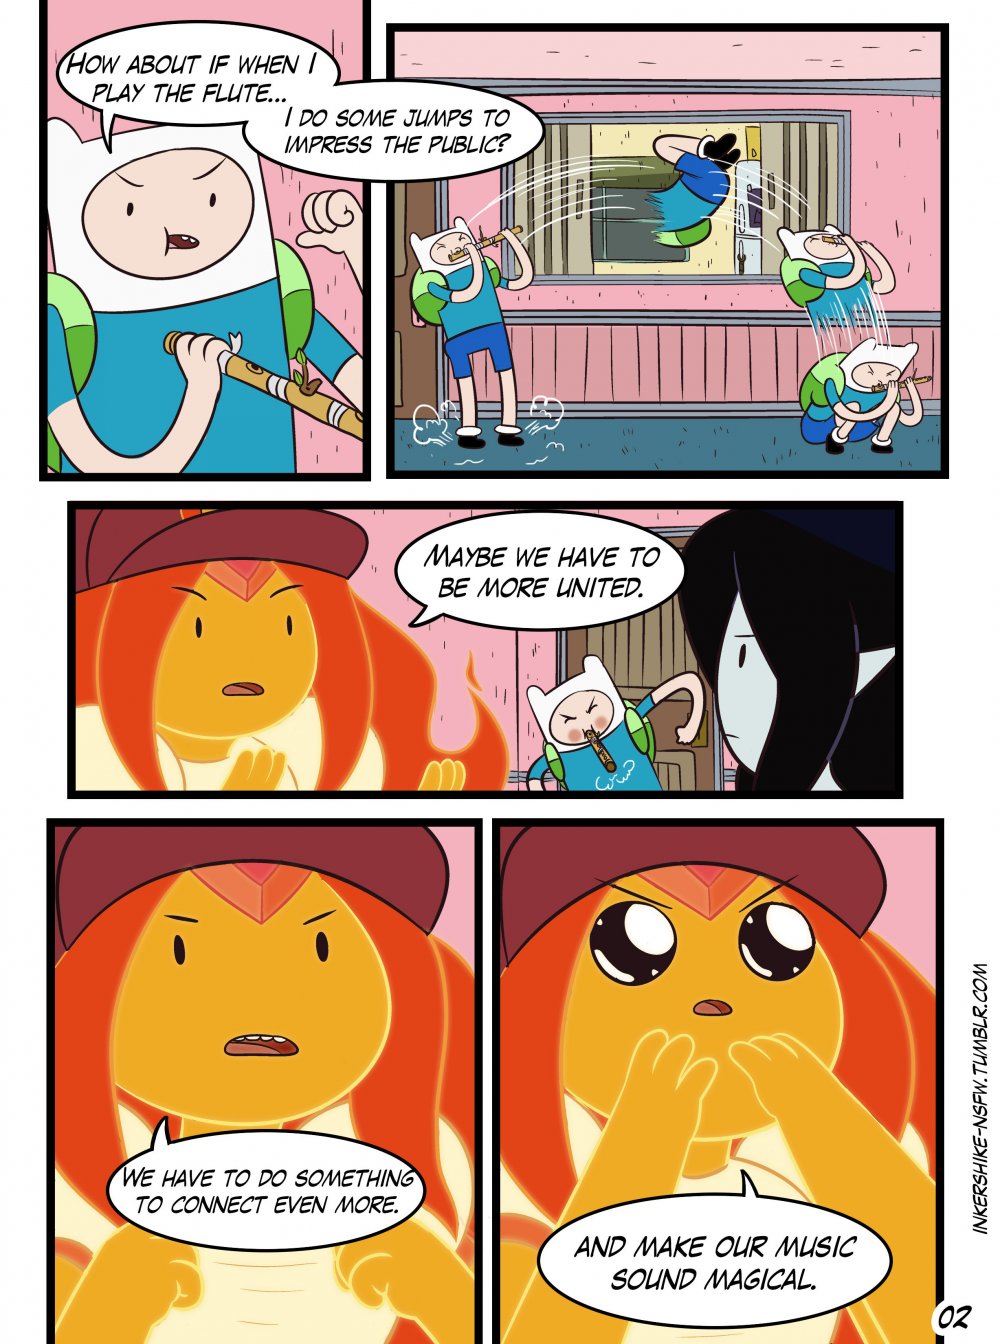 1000px x 1344px - Adventure time: Practice With The Band porn comic - the best cartoon porn  comics, Rule 34 | MULT34